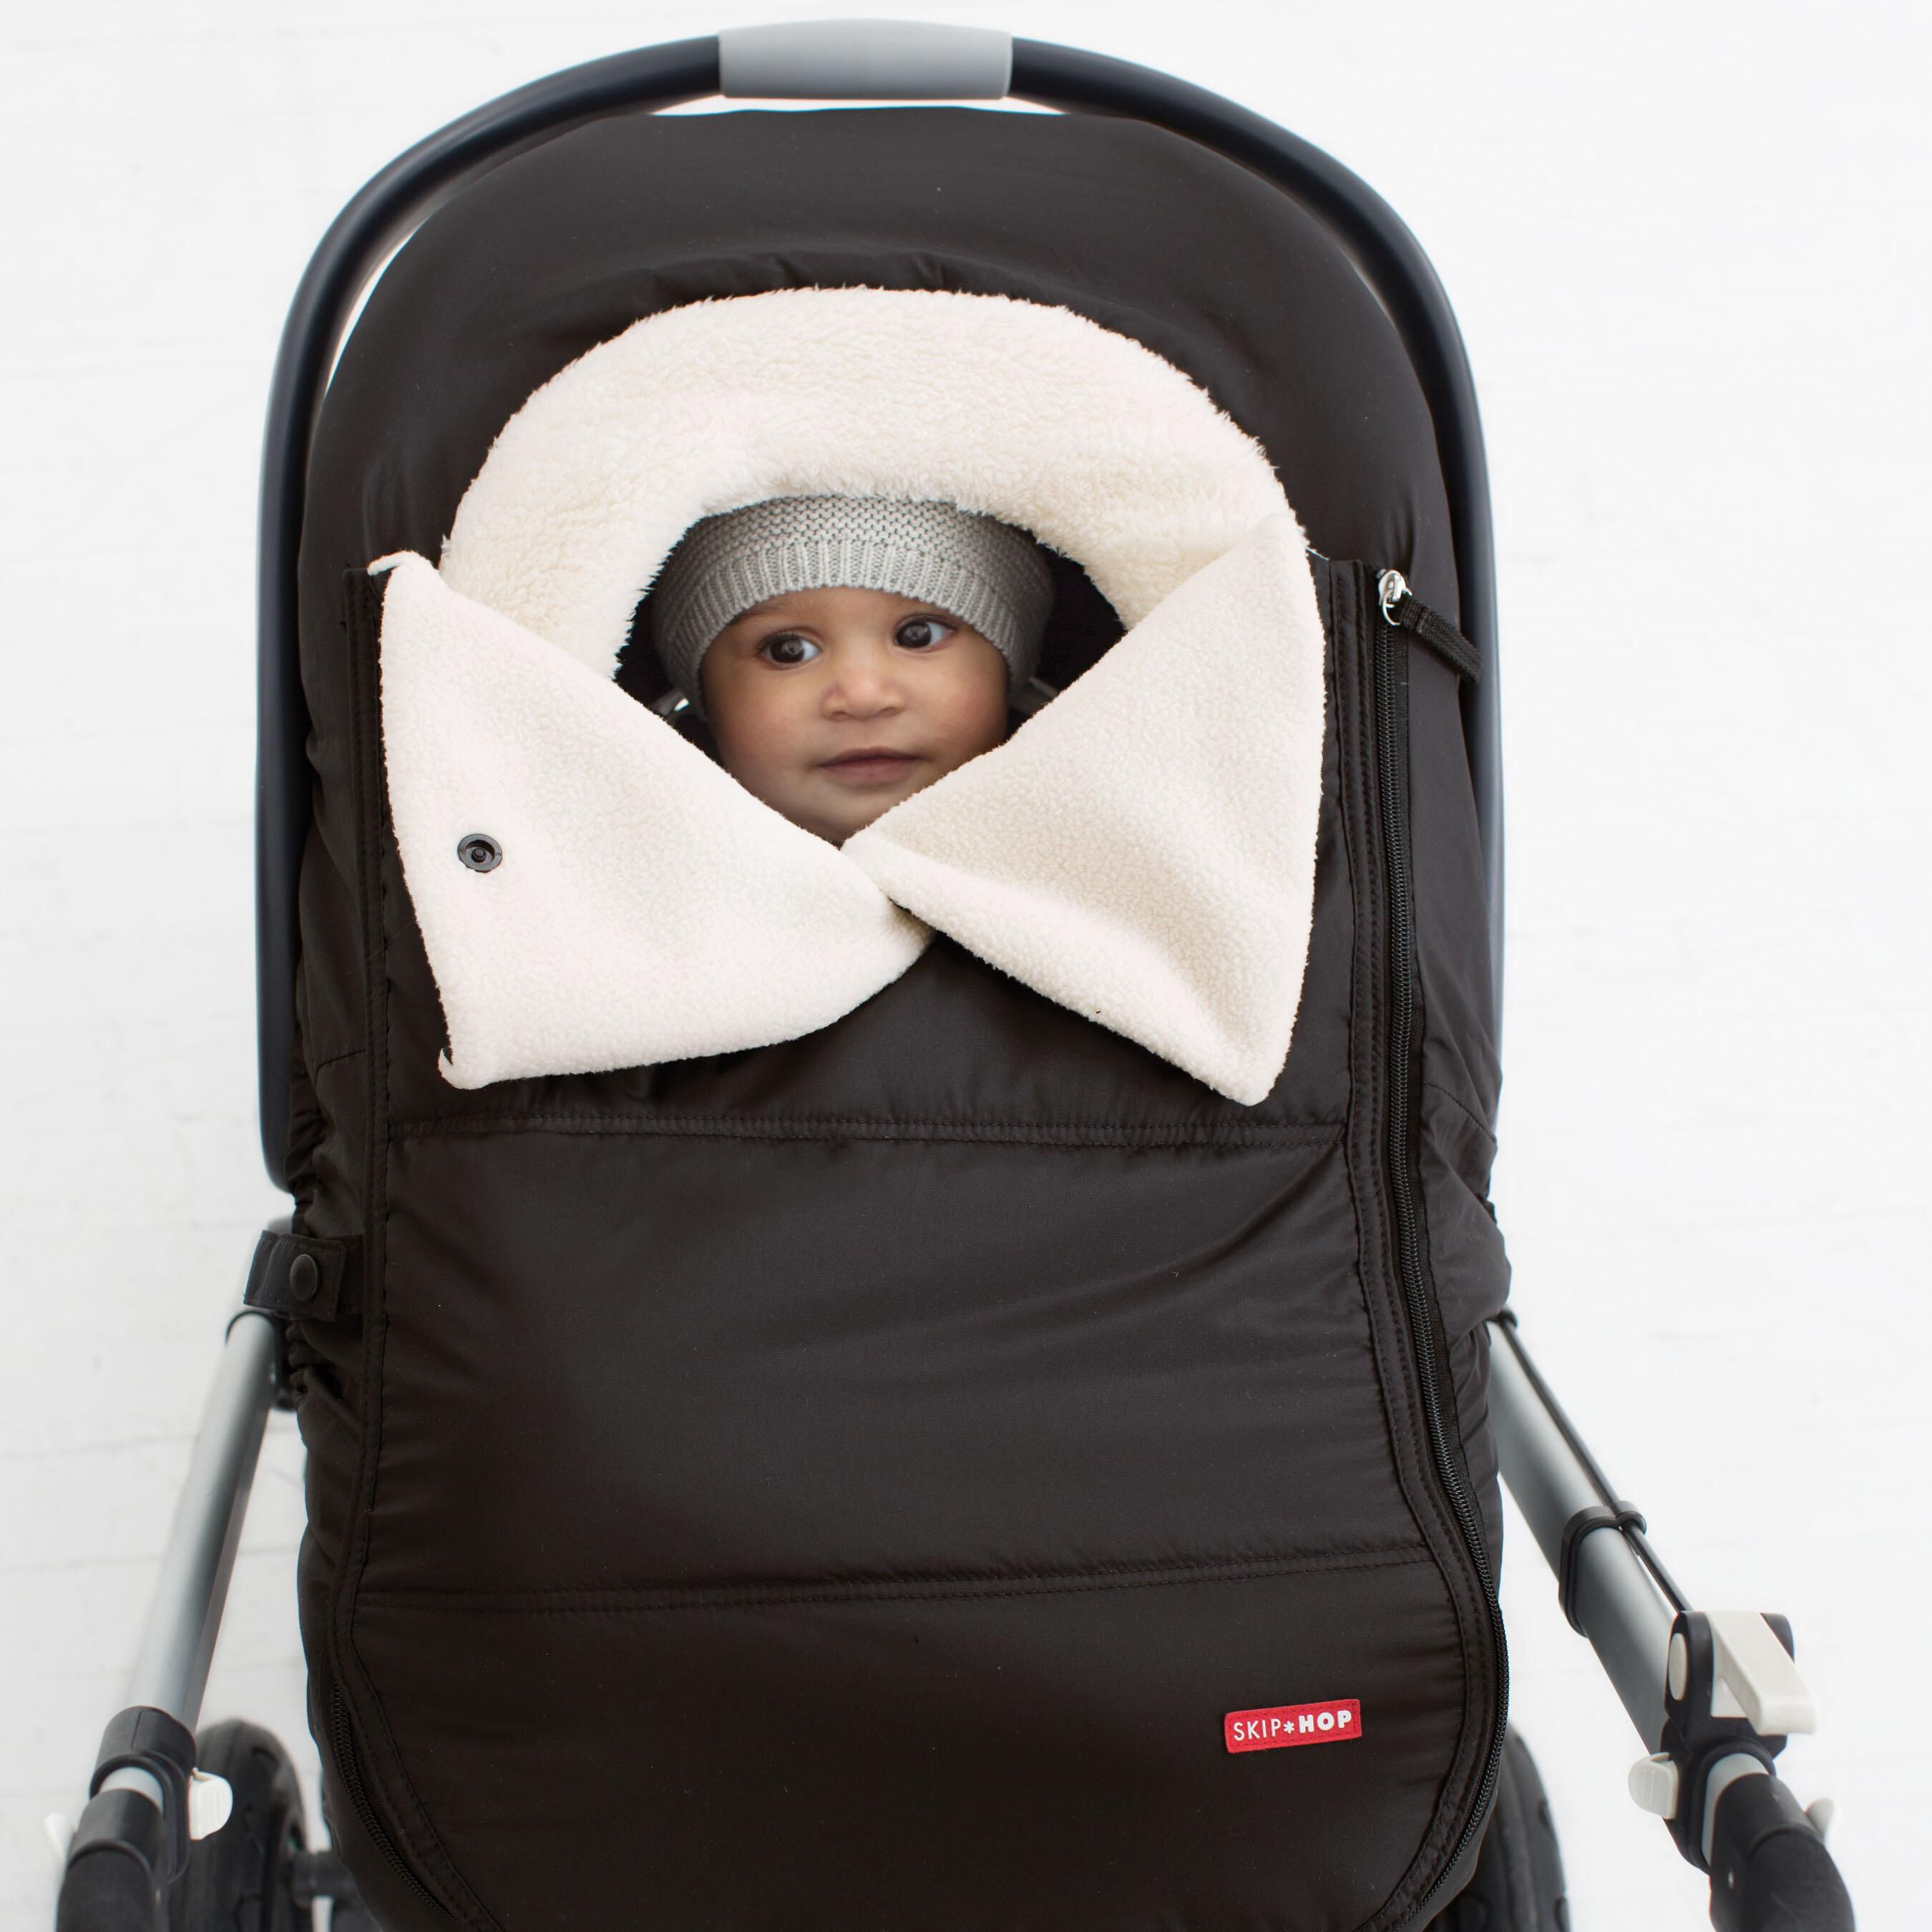 skip hop stroll and go car seat cover